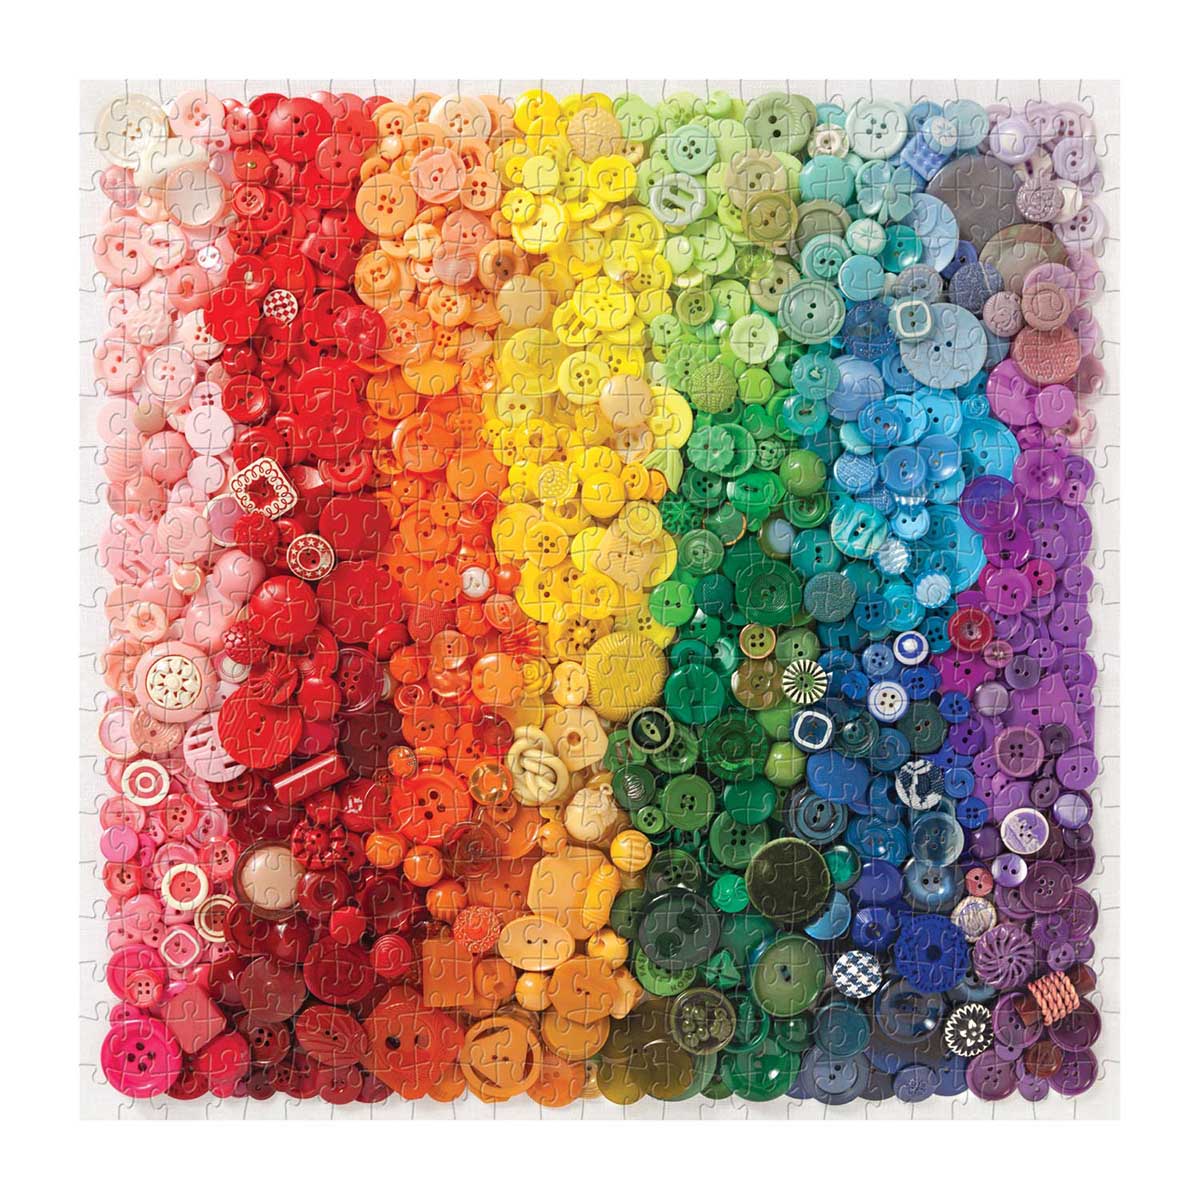 Rainbow Buttons (500 pc puzzle)